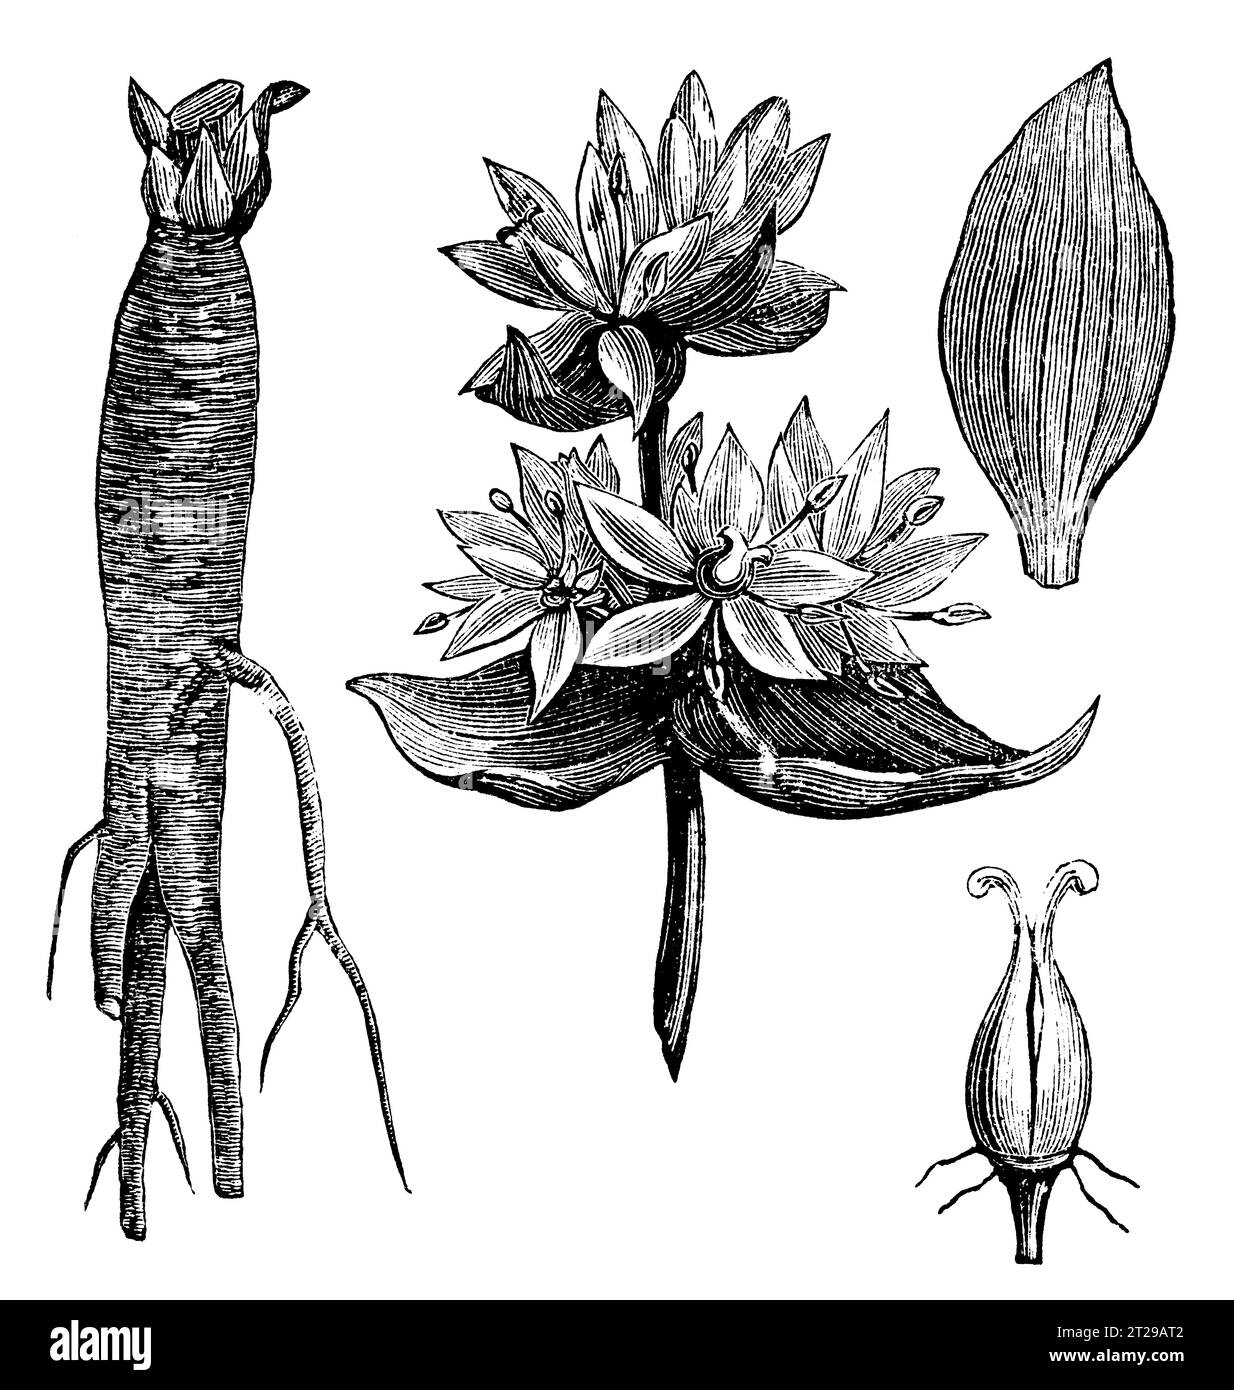 Gentiana lutea, digitally restored from 'The Condensed American Encyclopedia' published in 1882. Stock Photo